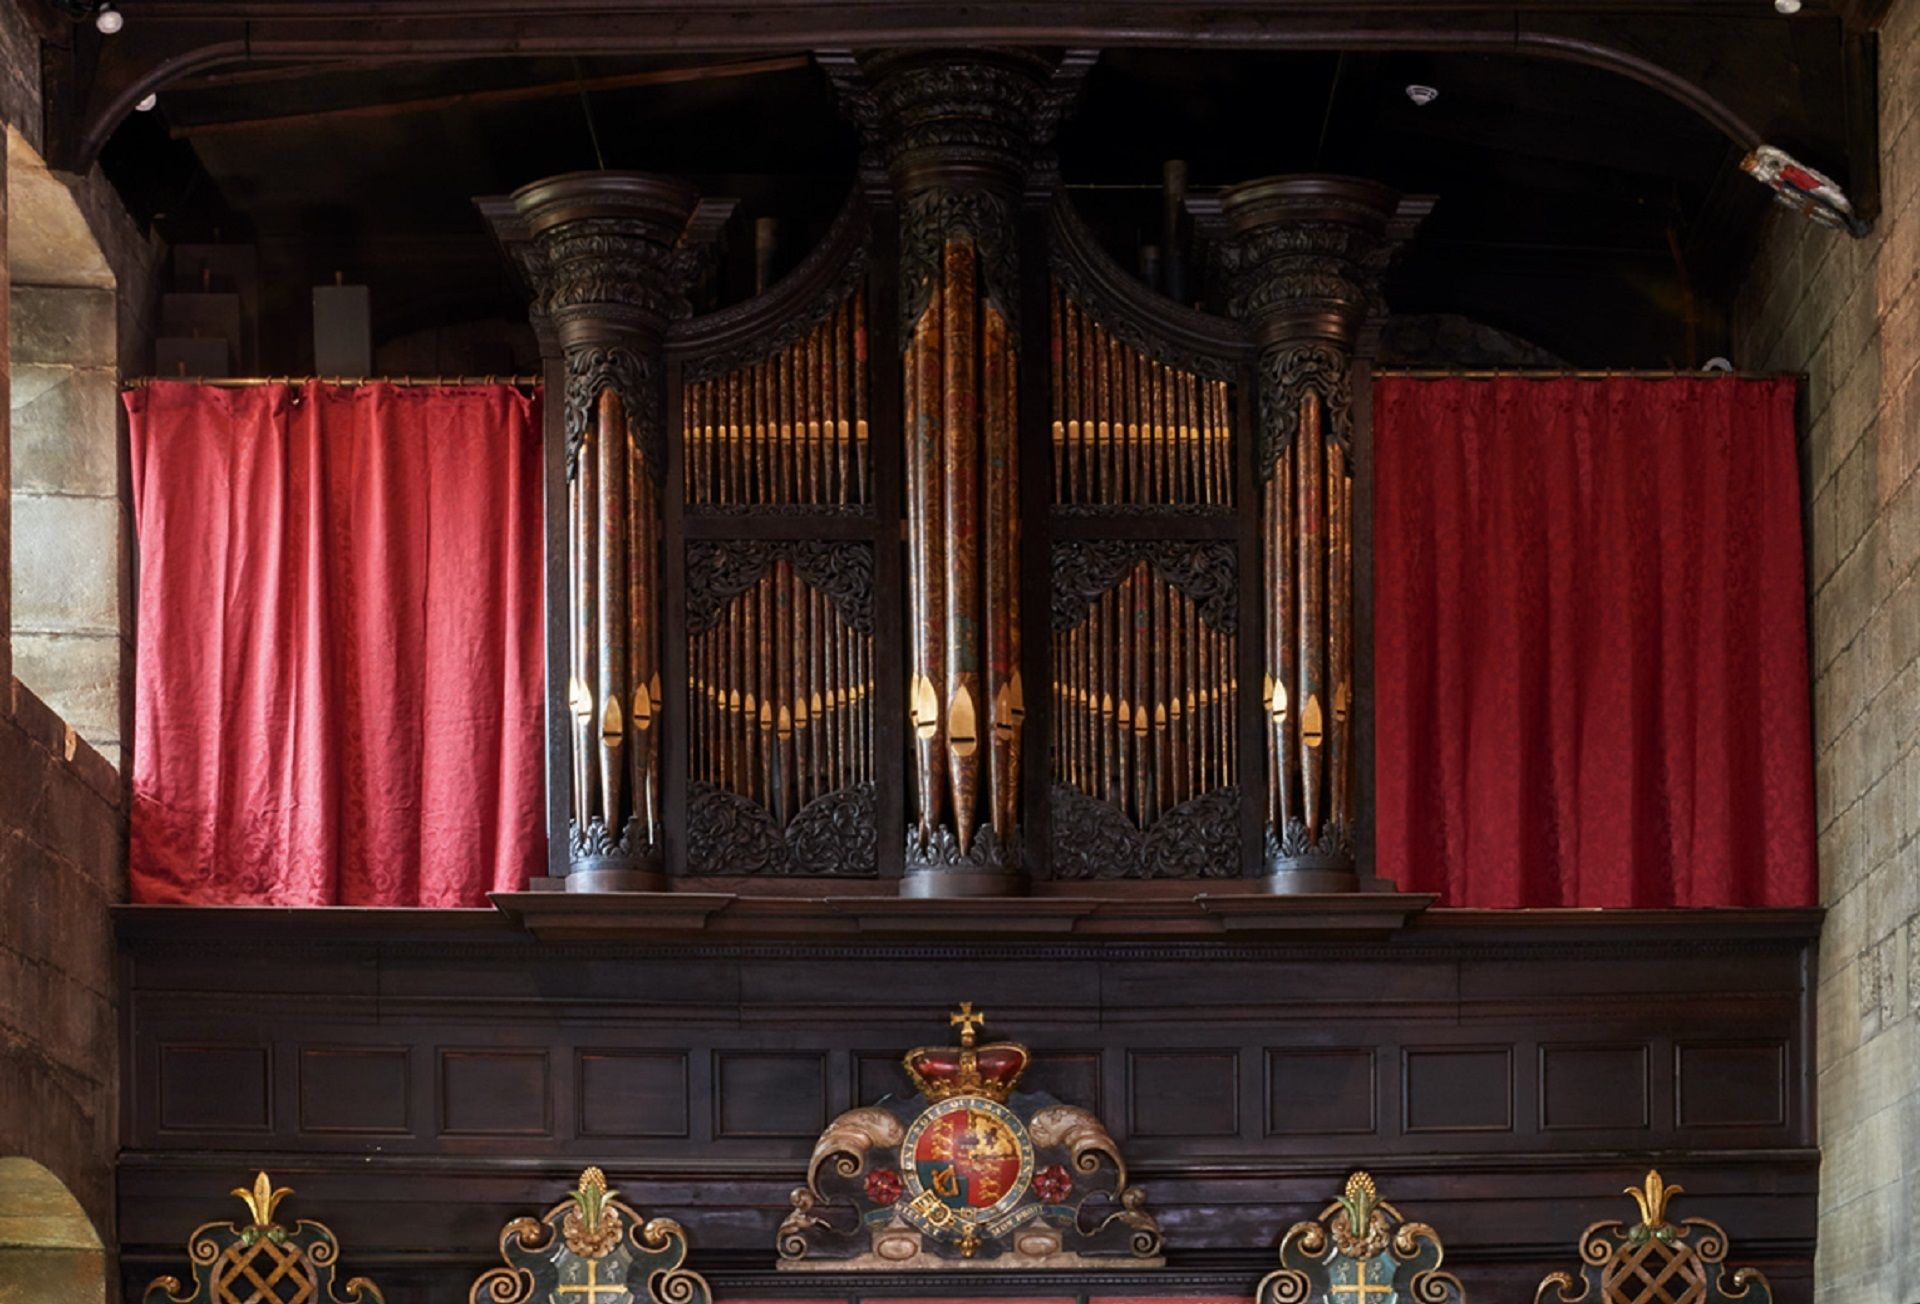 The 17th organ in the Tunstall Chapel. Looking west, the organ is above the 17th century wooden screen.